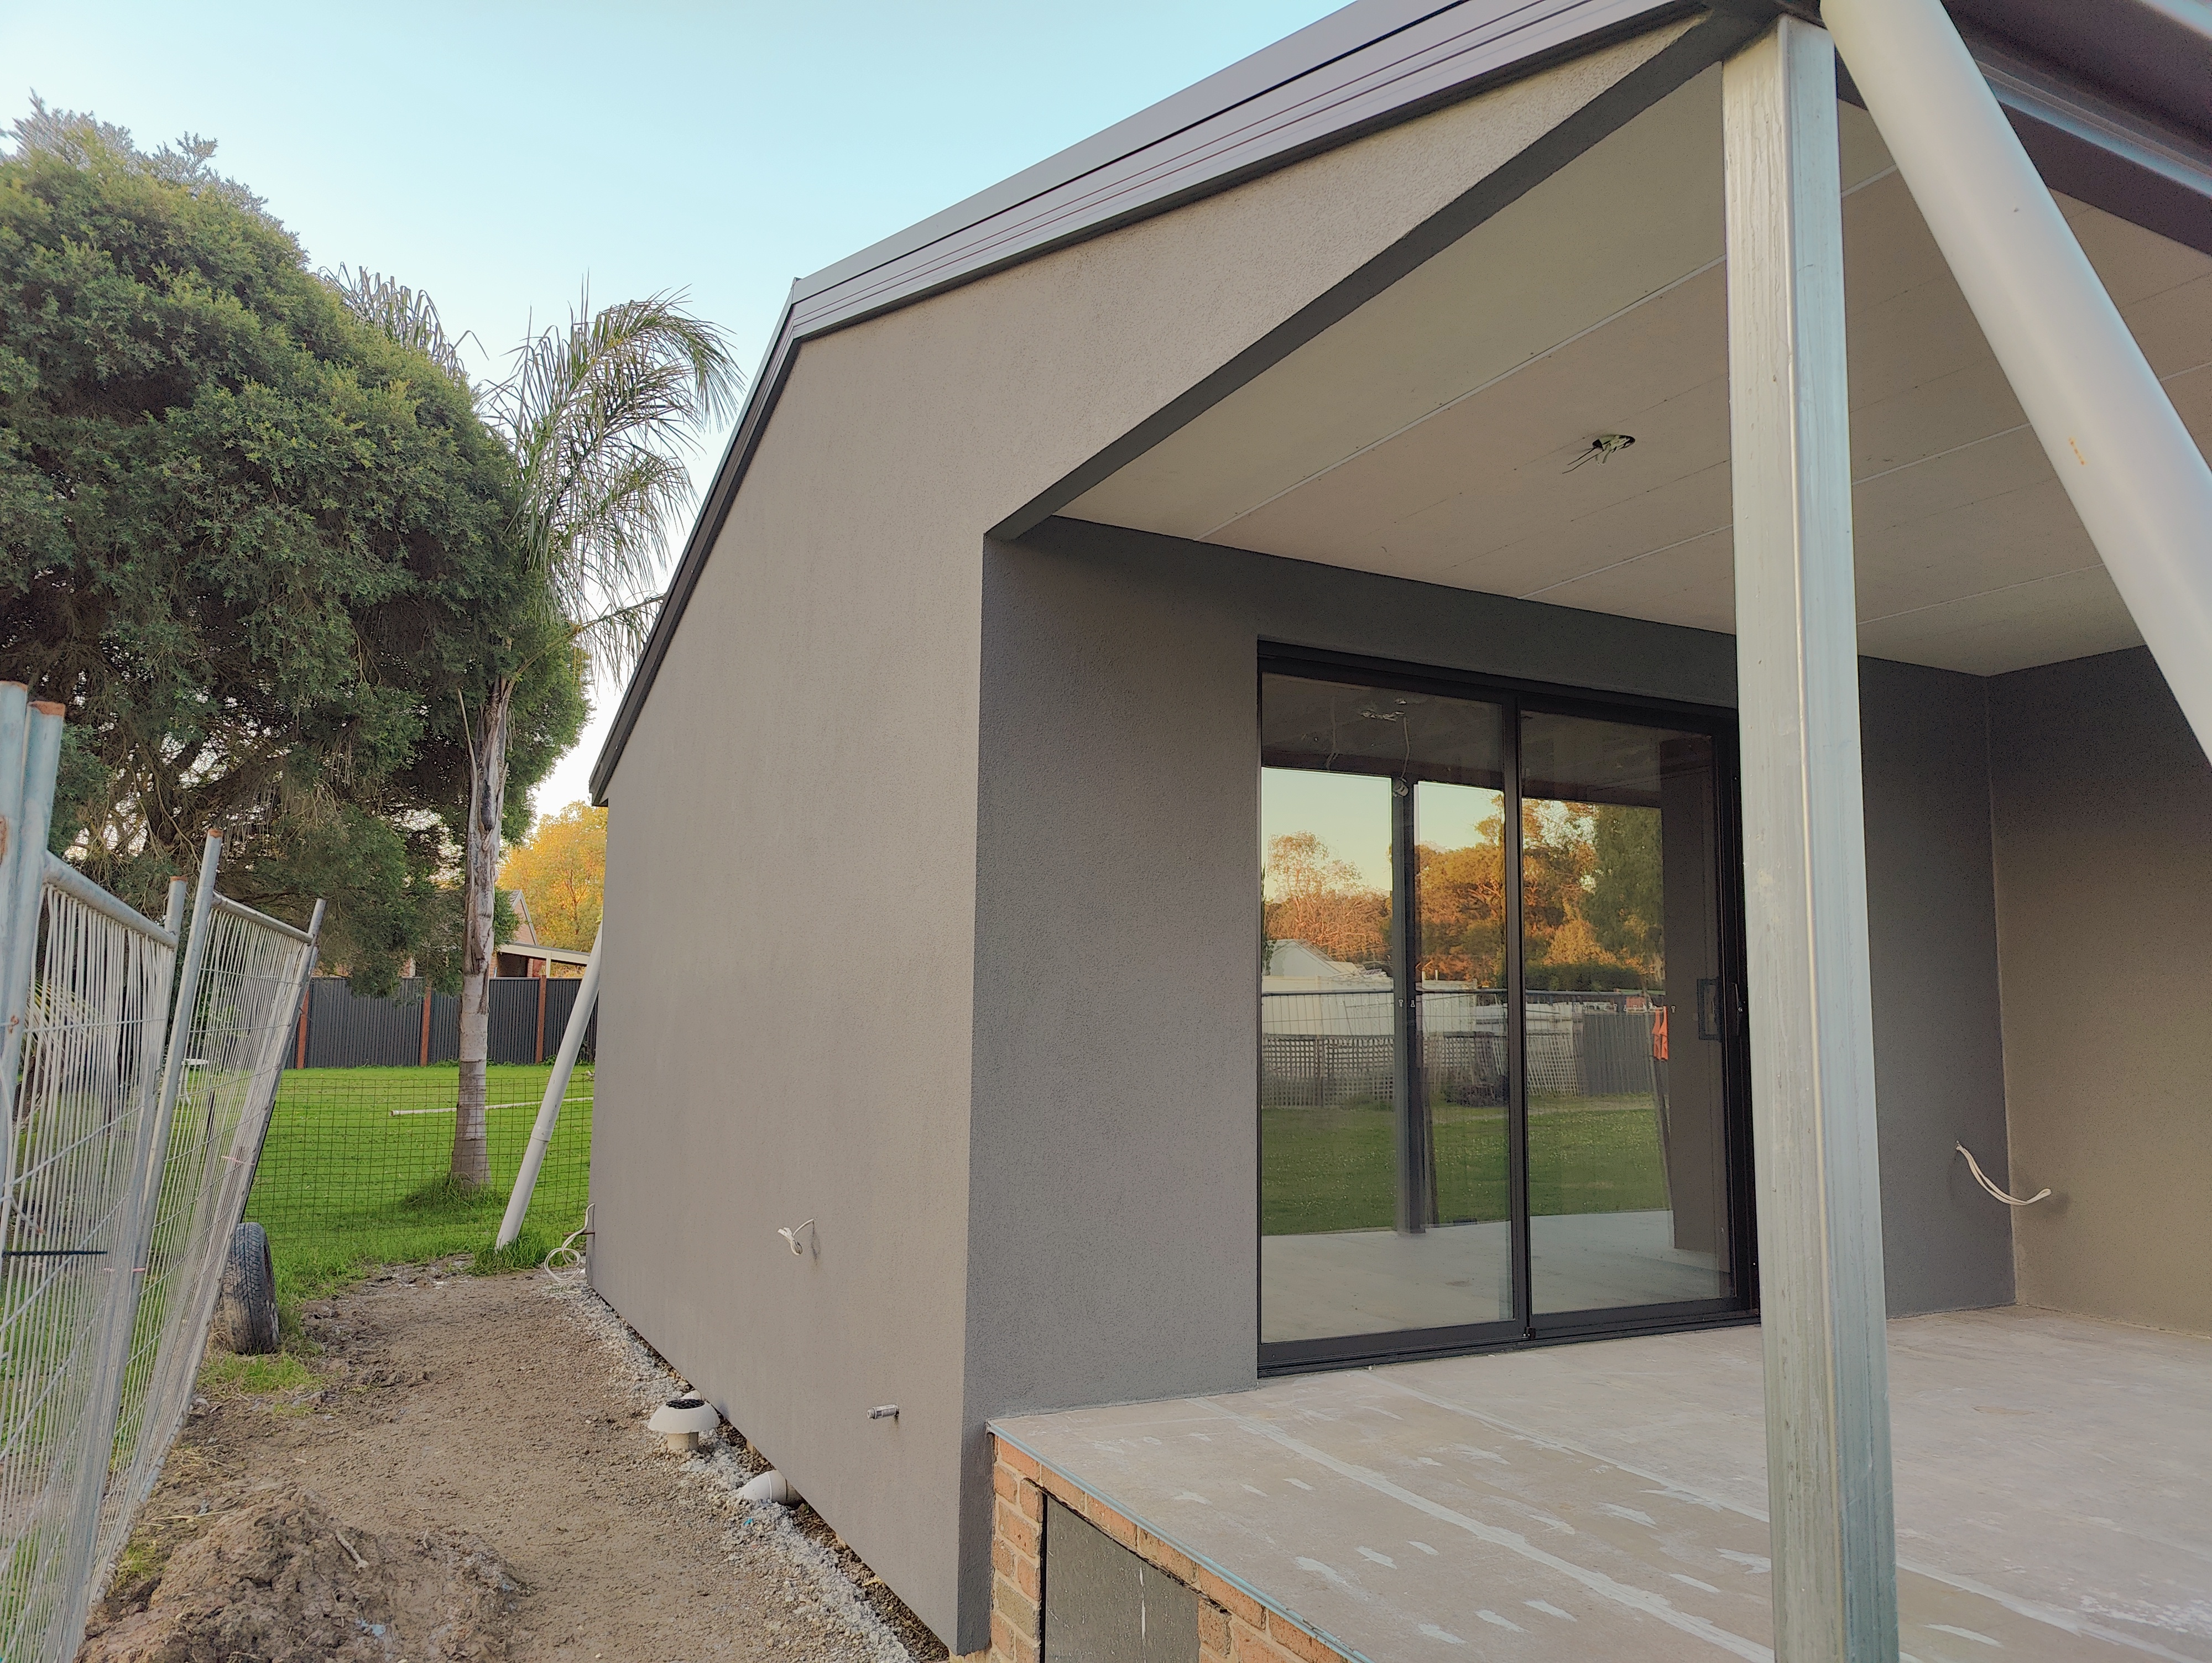 Making the Right Choice: Exploring Cladding Options for Your Granny Flat